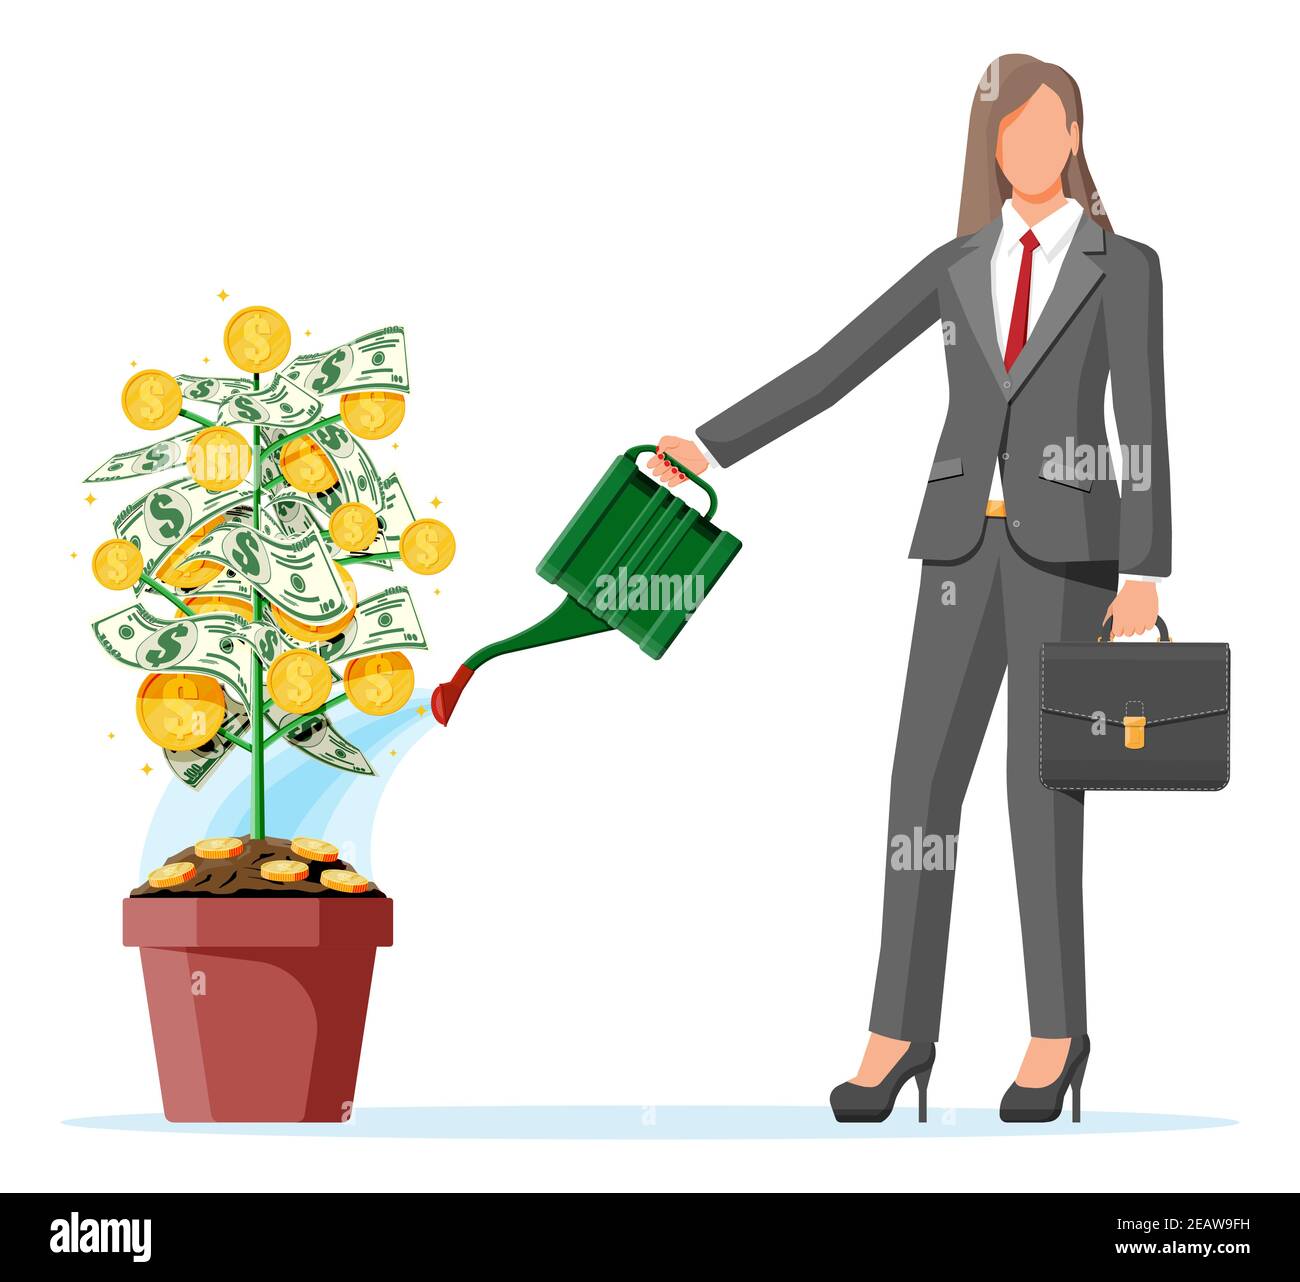 Businesswoman watering money coin tree. Growing money tree. Investment, investing. Gold coins and dollar banknotes on branches. Symbol of wealth. Business success. Flat vector illustration. Stock Vector